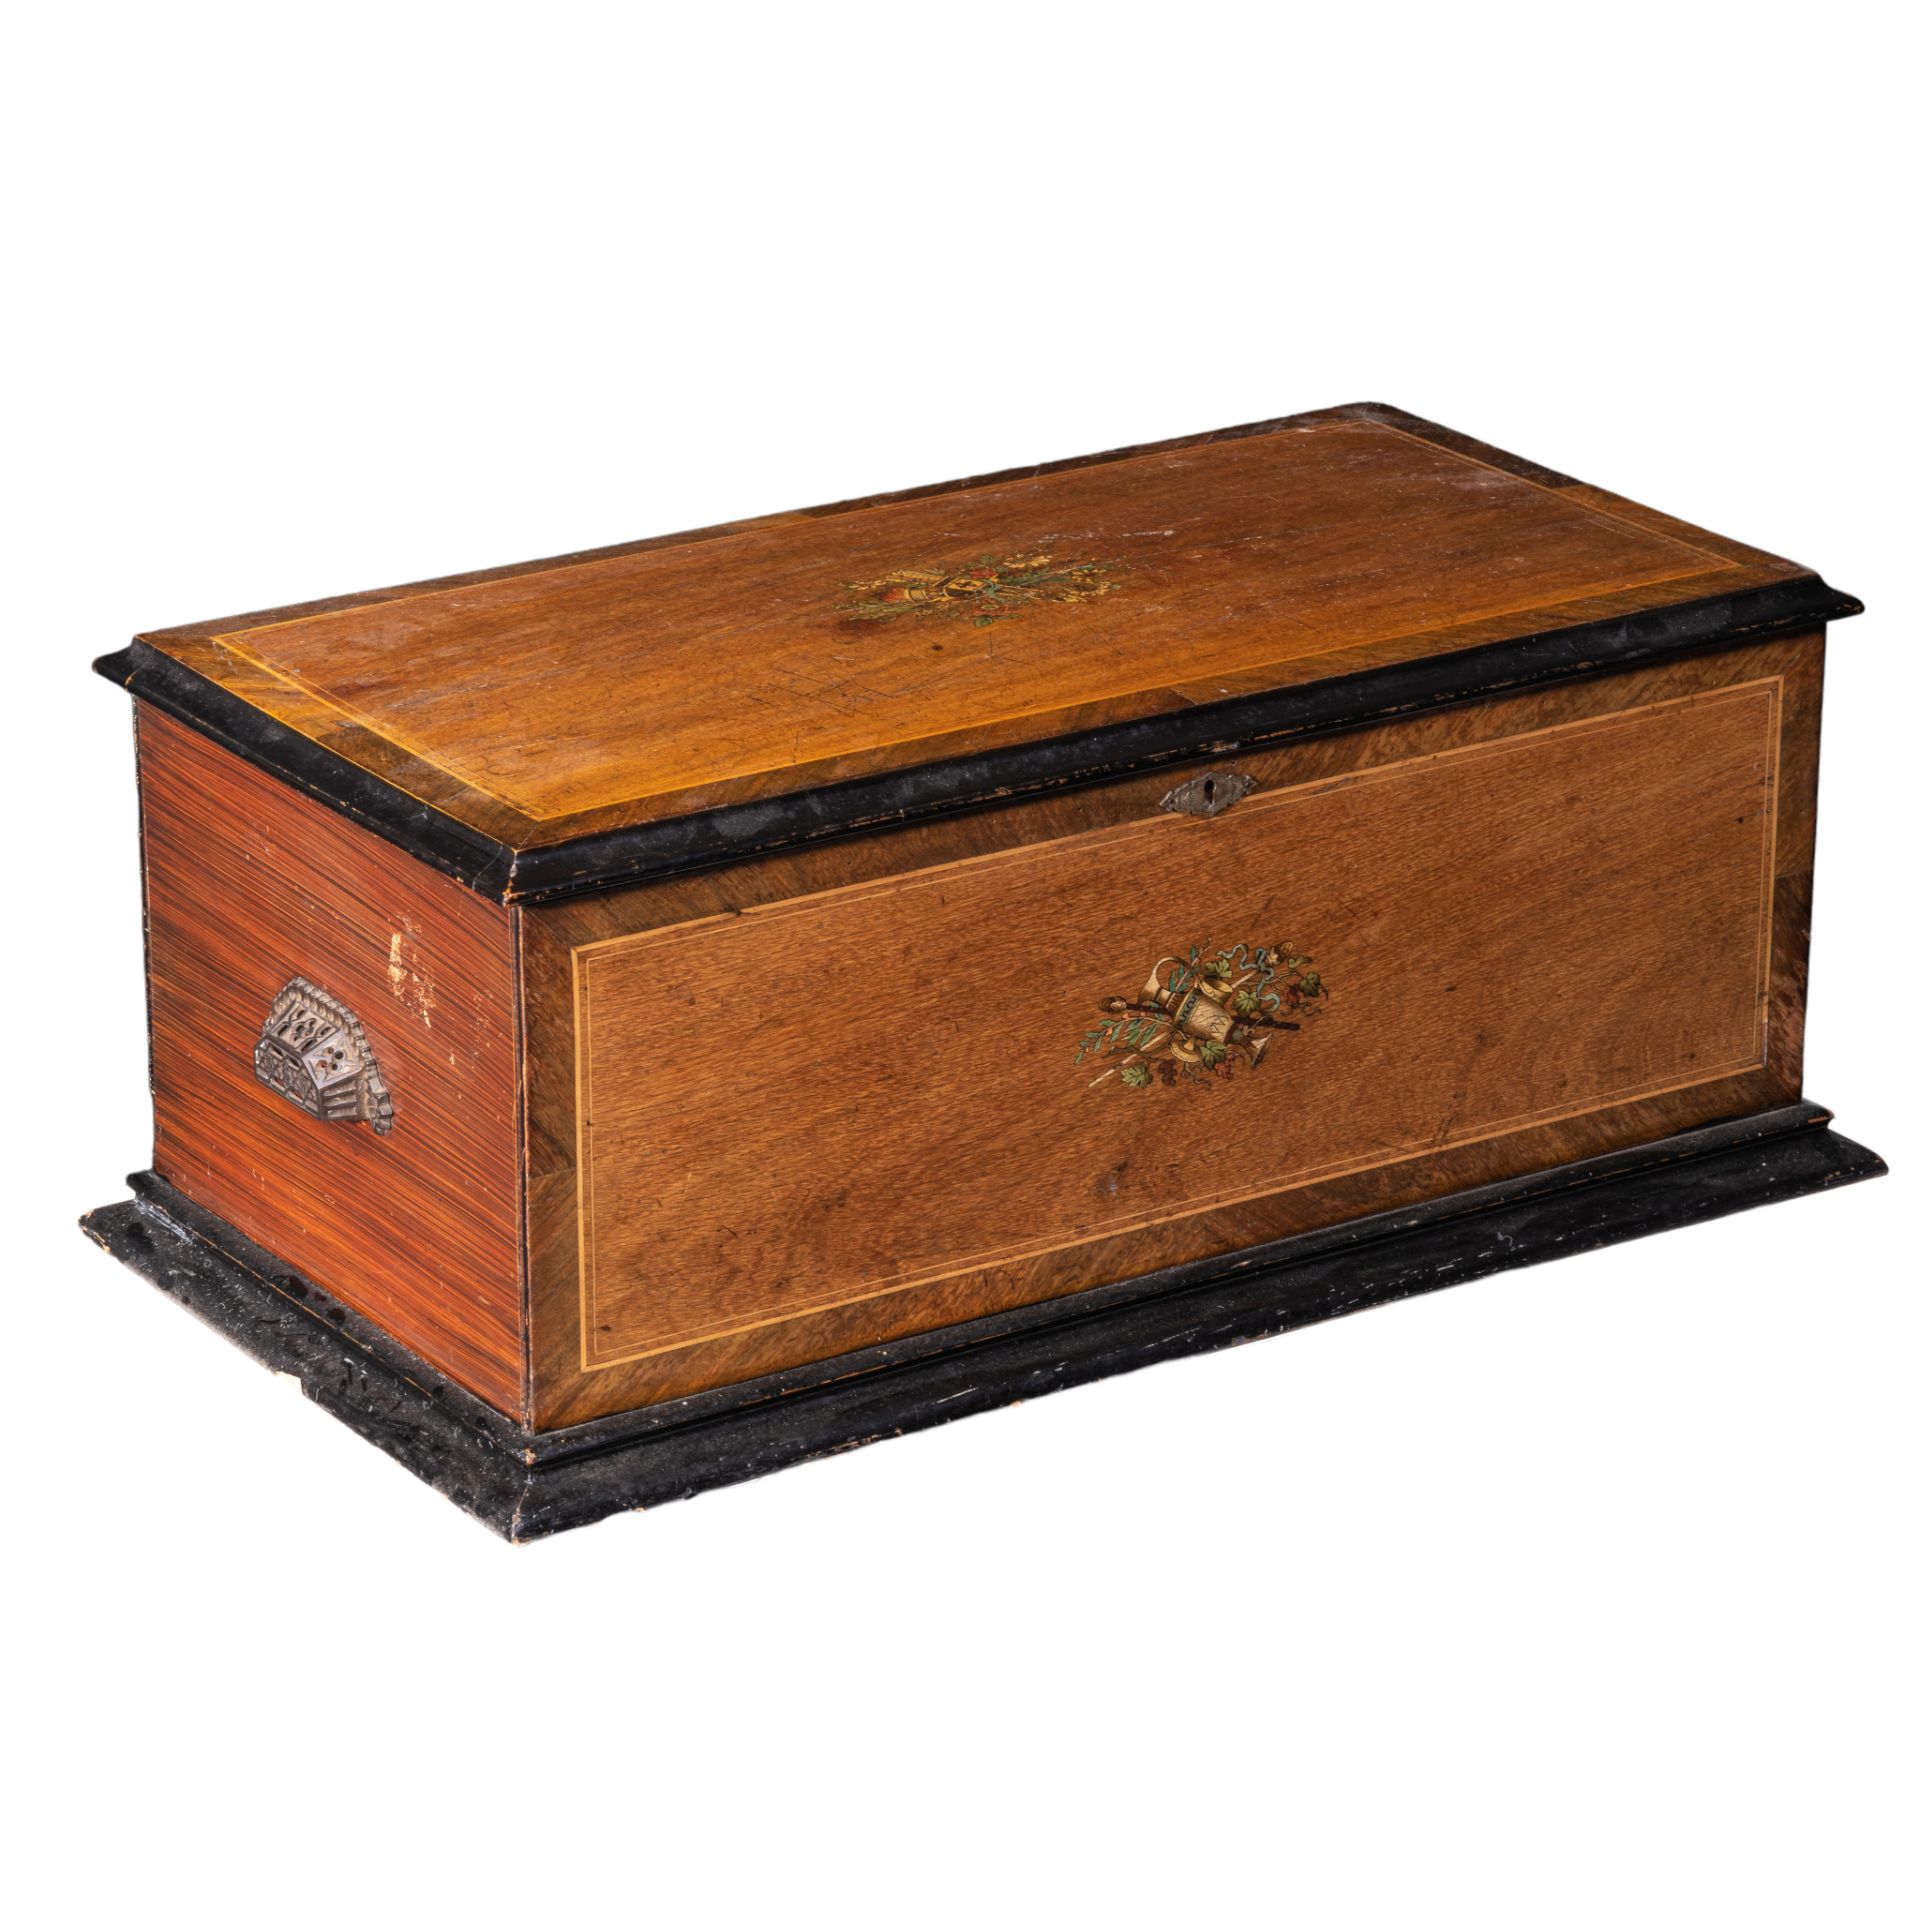 A Victorian mahogany and rosewood veneered cylinder musical box, 1920s, H 28,5 - W 70- D 37 cm - Image 6 of 10